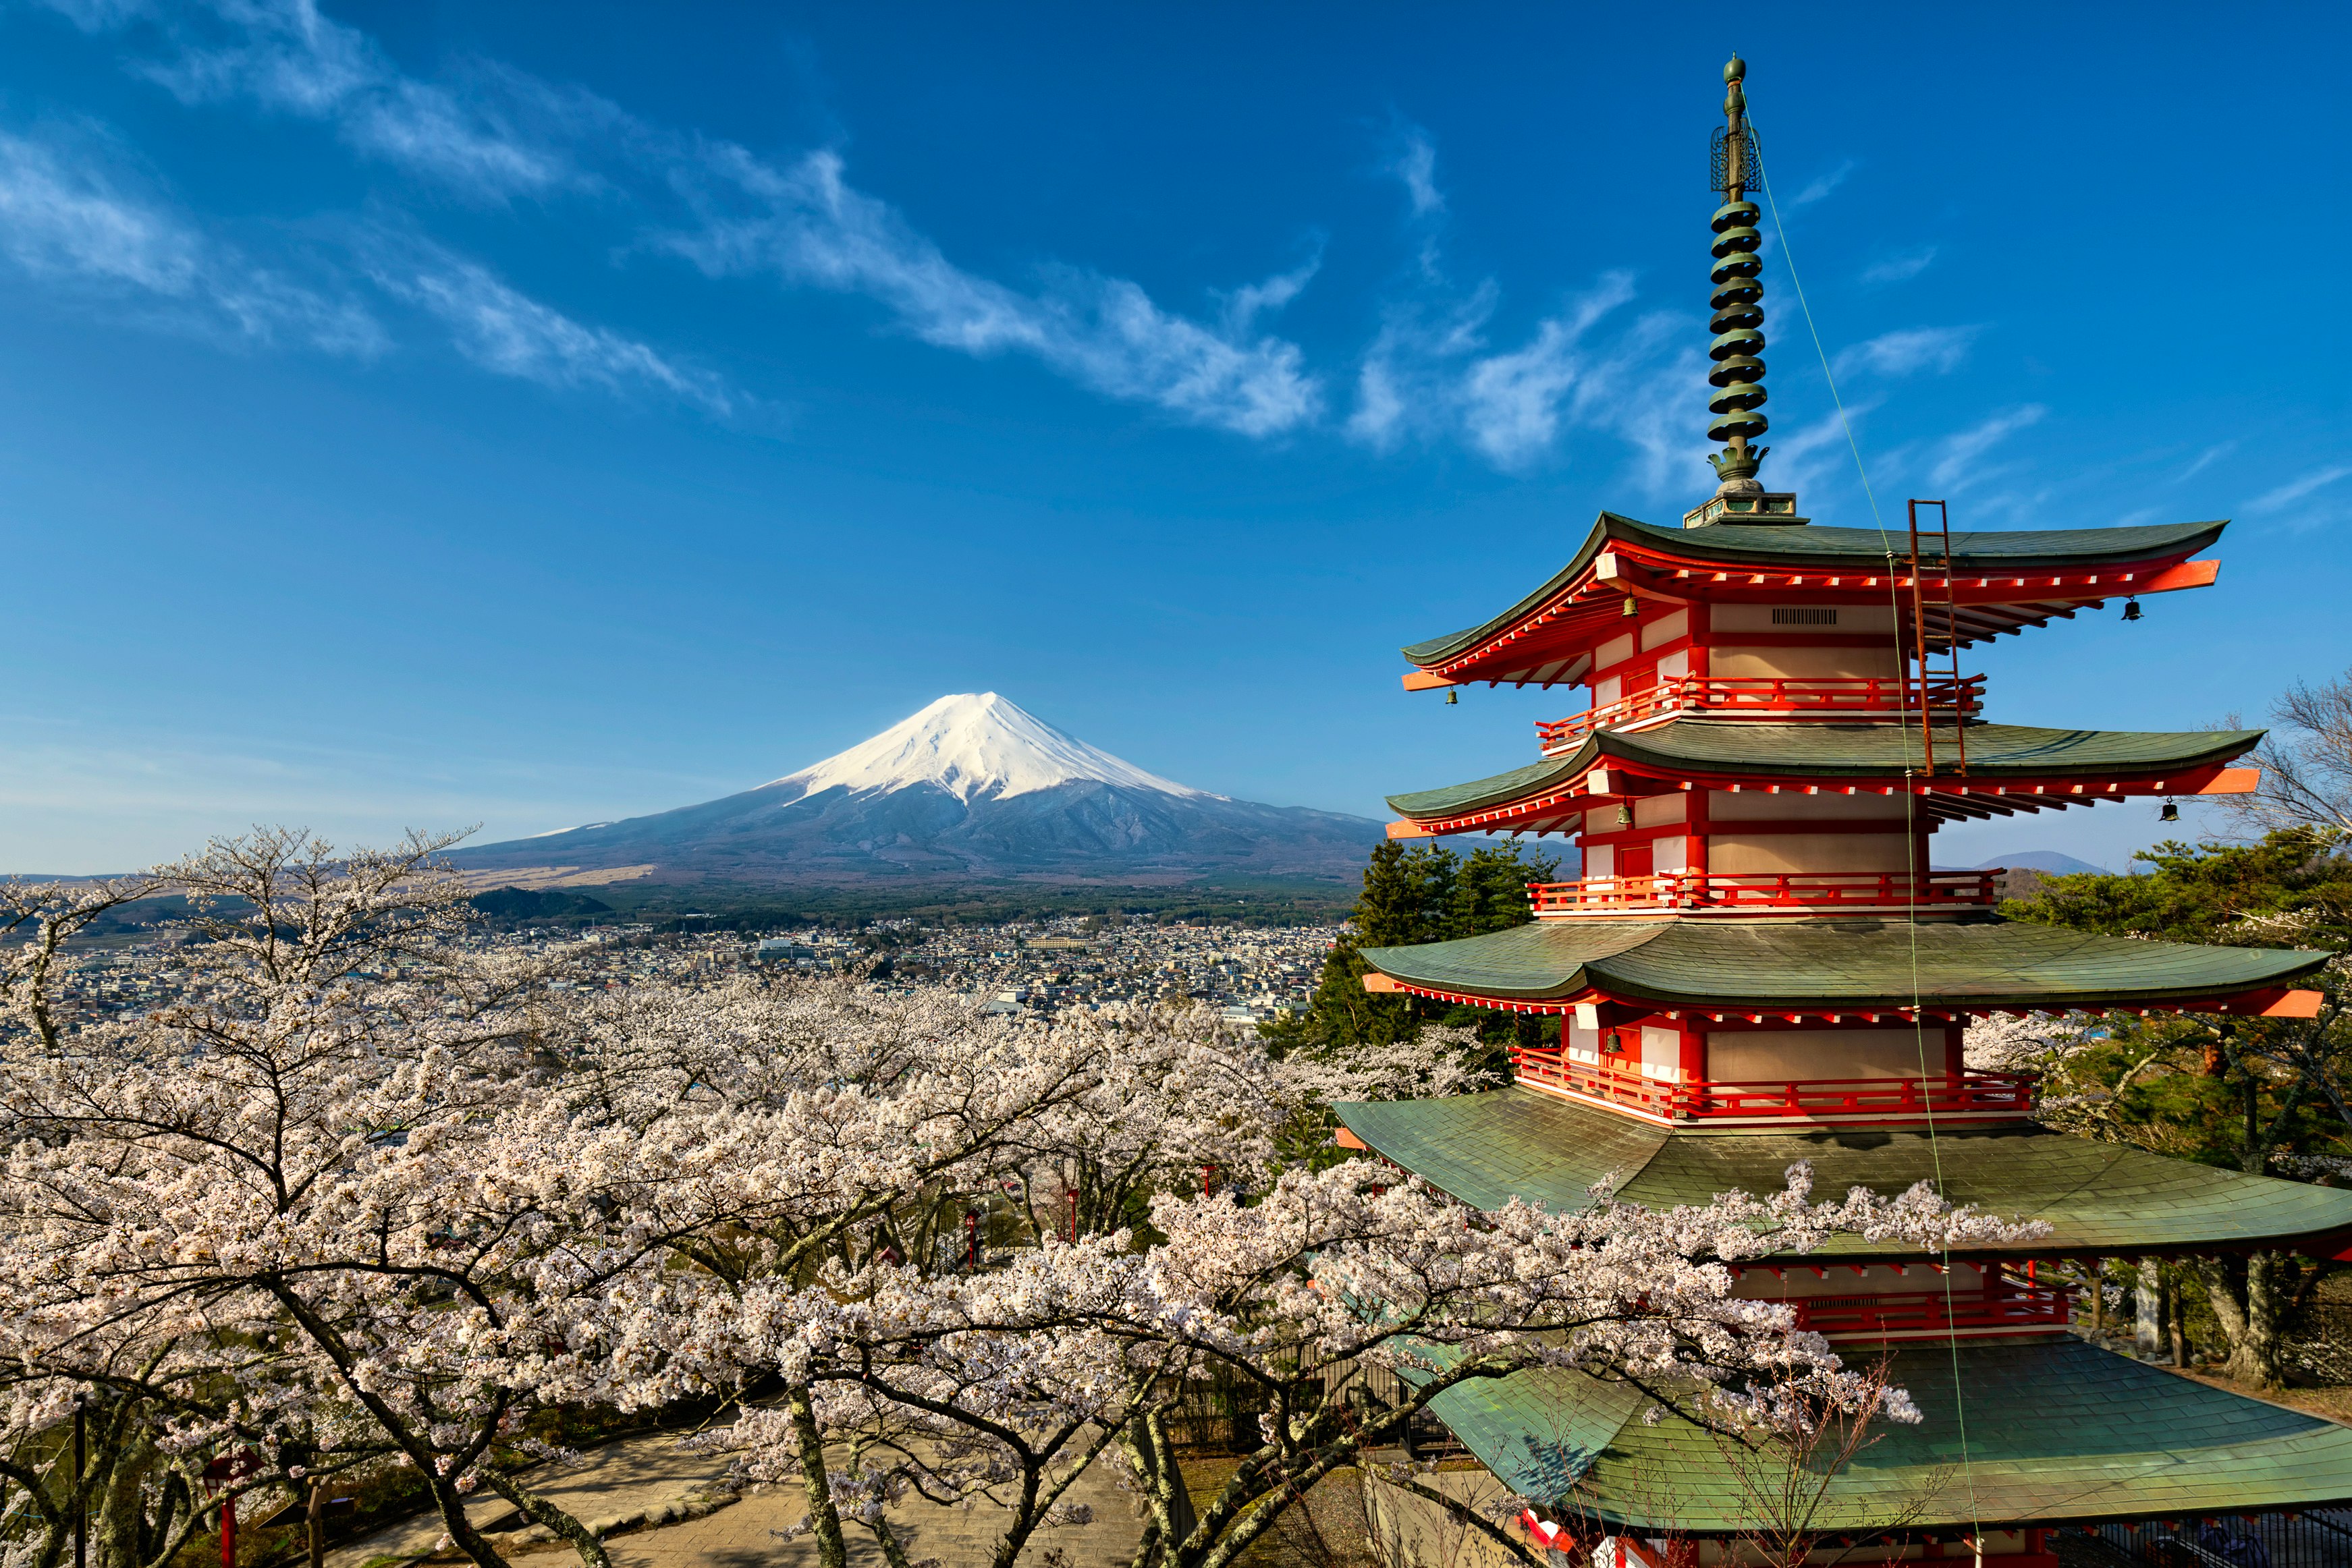 Mount Fuji with a red pagoda in spring season with cherry blossoms  Japan – © Mapics - Fotolia